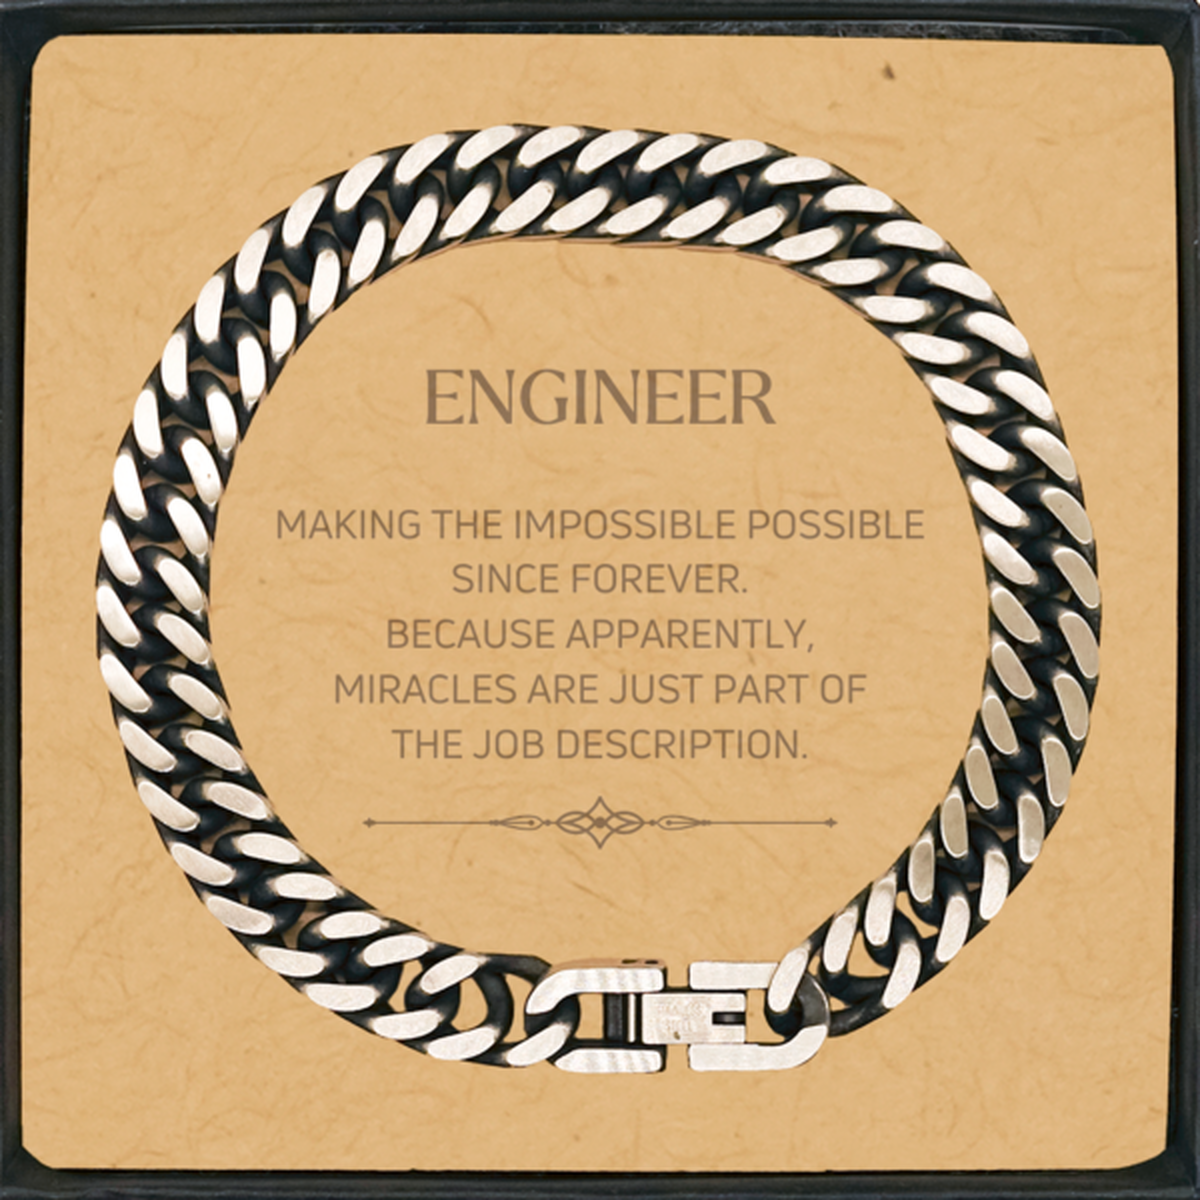 Funny Engineer Gifts, Miracles are just part of the job description, Inspirational Birthday Cuban Link Chain Bracelet For Engineer, Men, Women, Coworkers, Friends, Boss